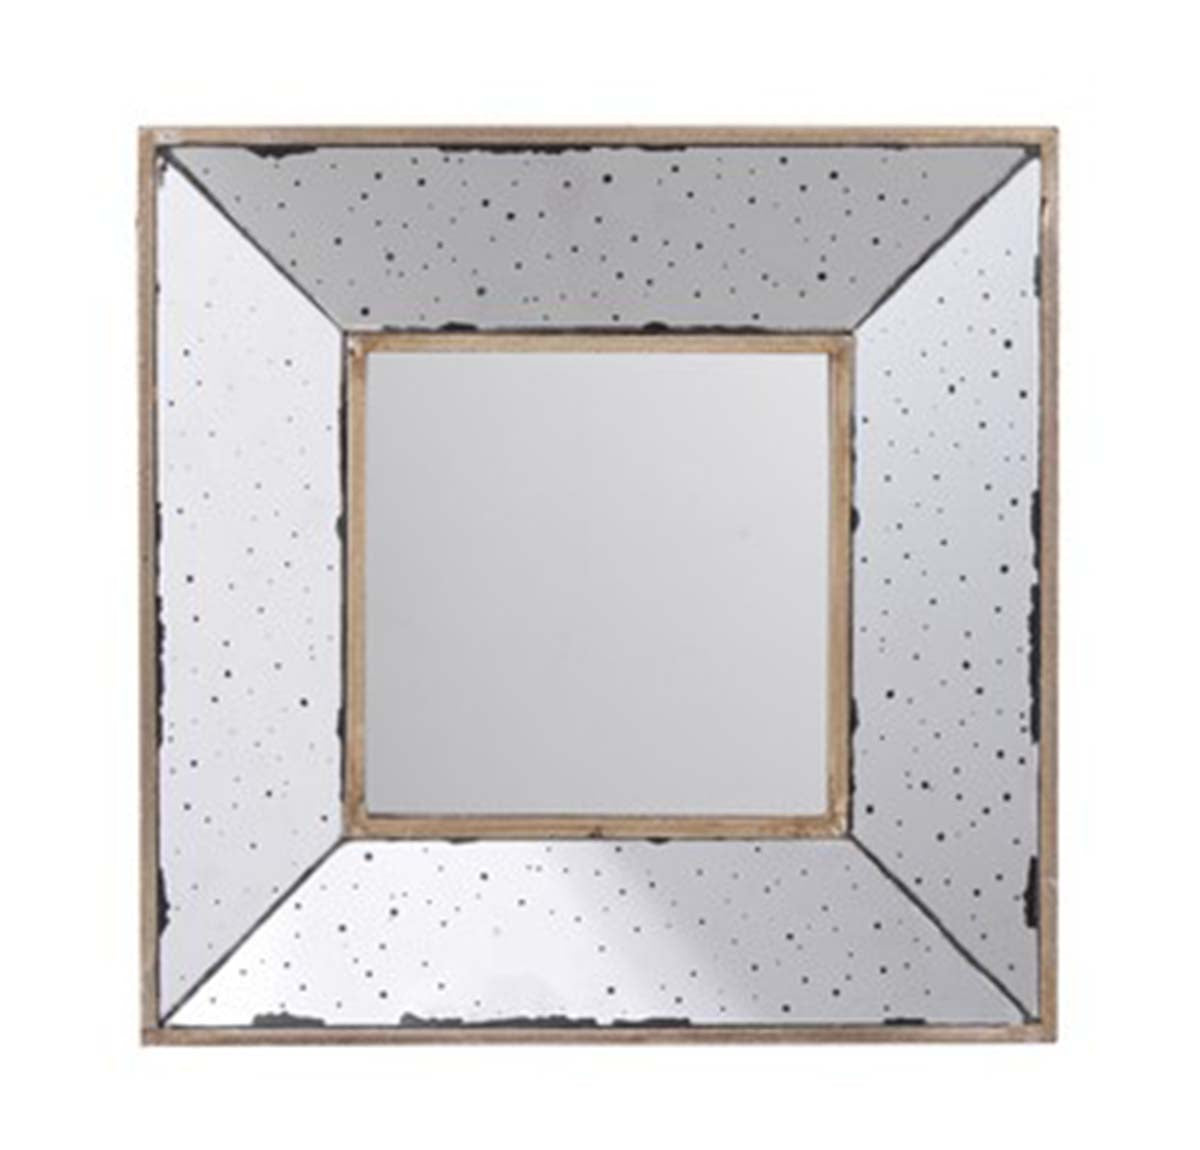 Antique Glass Style Square Wall Hanging Mirror | Home Decor